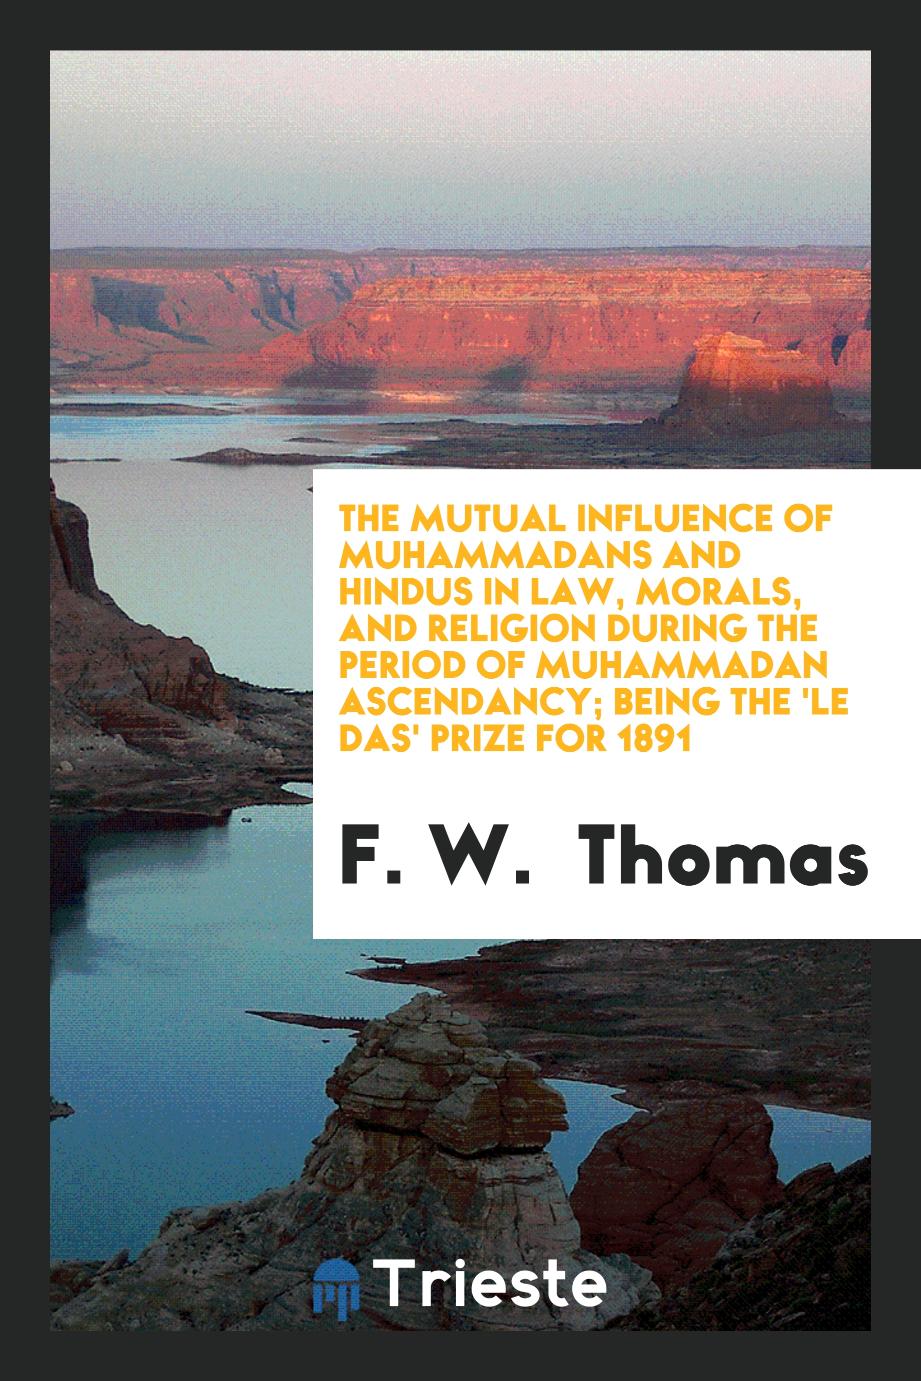 The Mutual Influence of Muhammadans and Hindus in Law, Morals, and Religion during the Period of Muhammadan Ascendancy; Being the 'Le Das' Prize for 1891